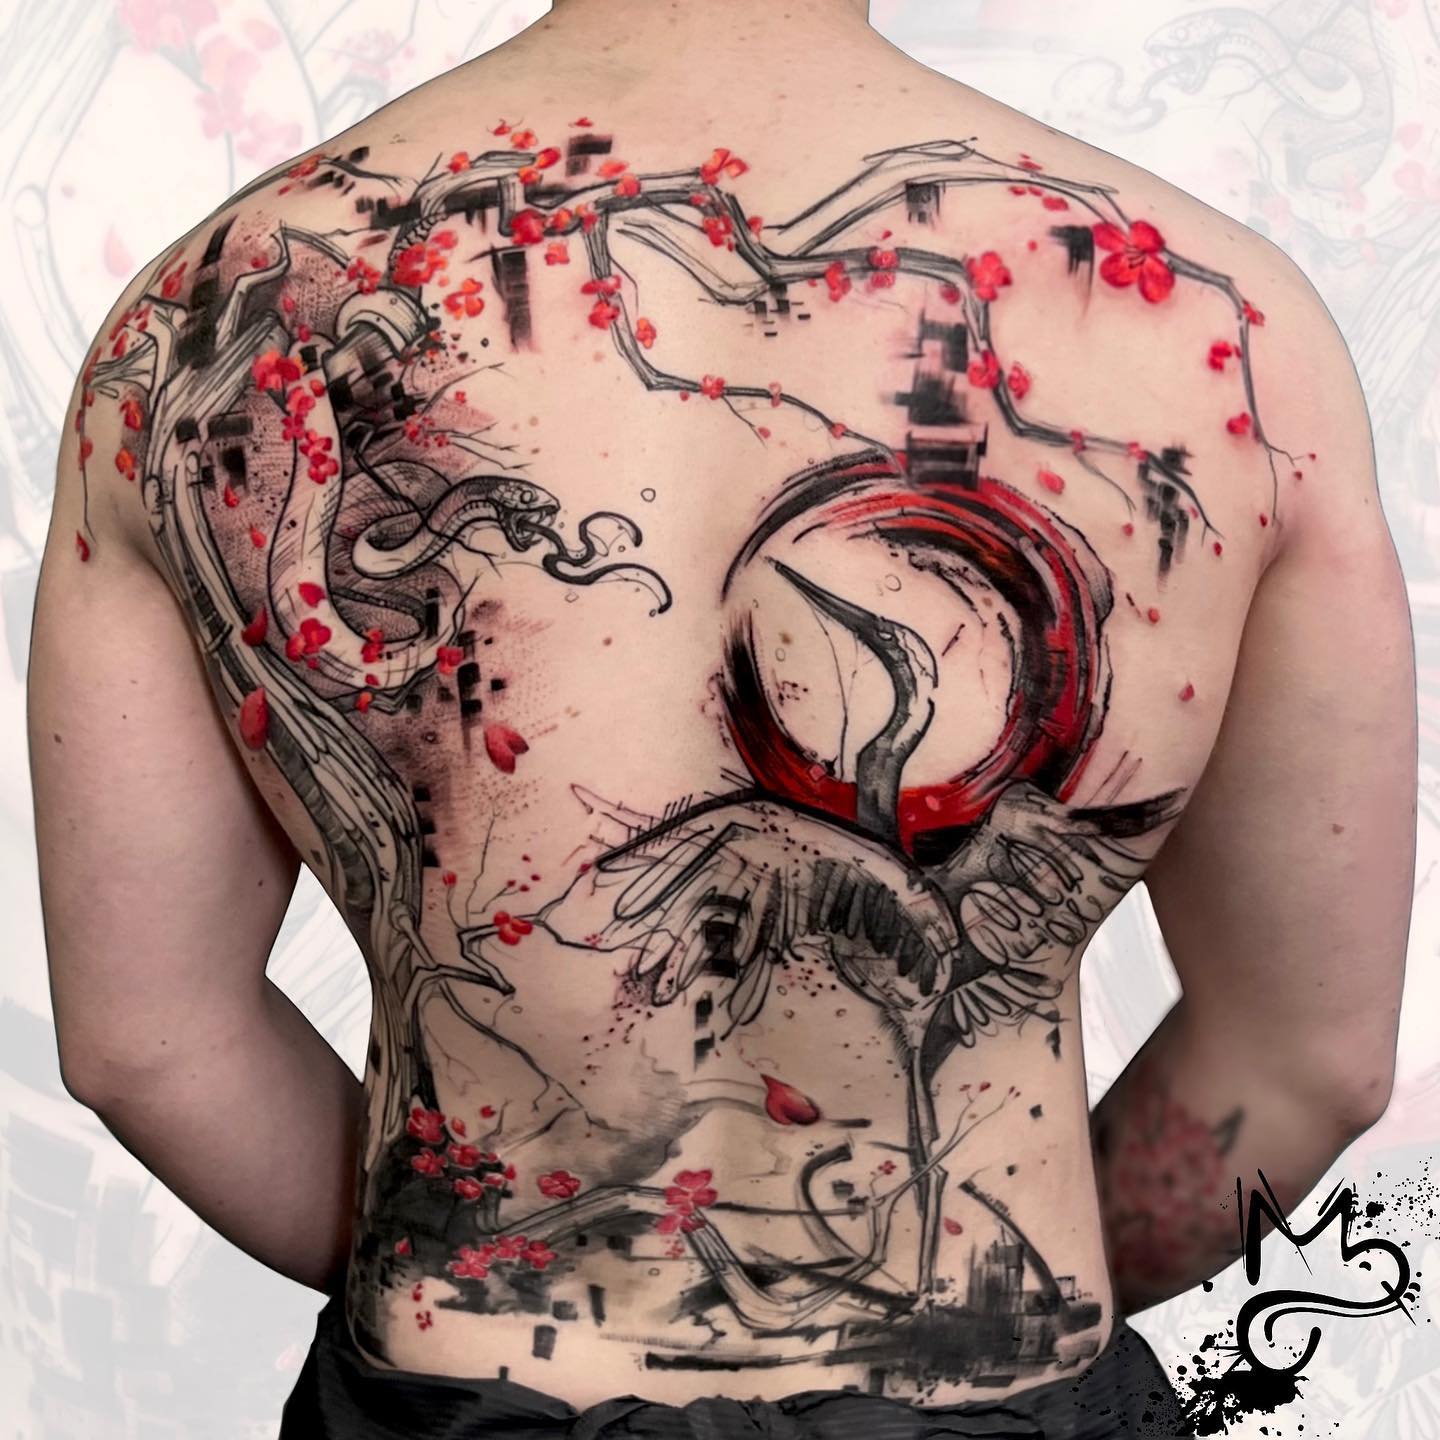 Watercolor tattoo on back by andremelo tattooartist